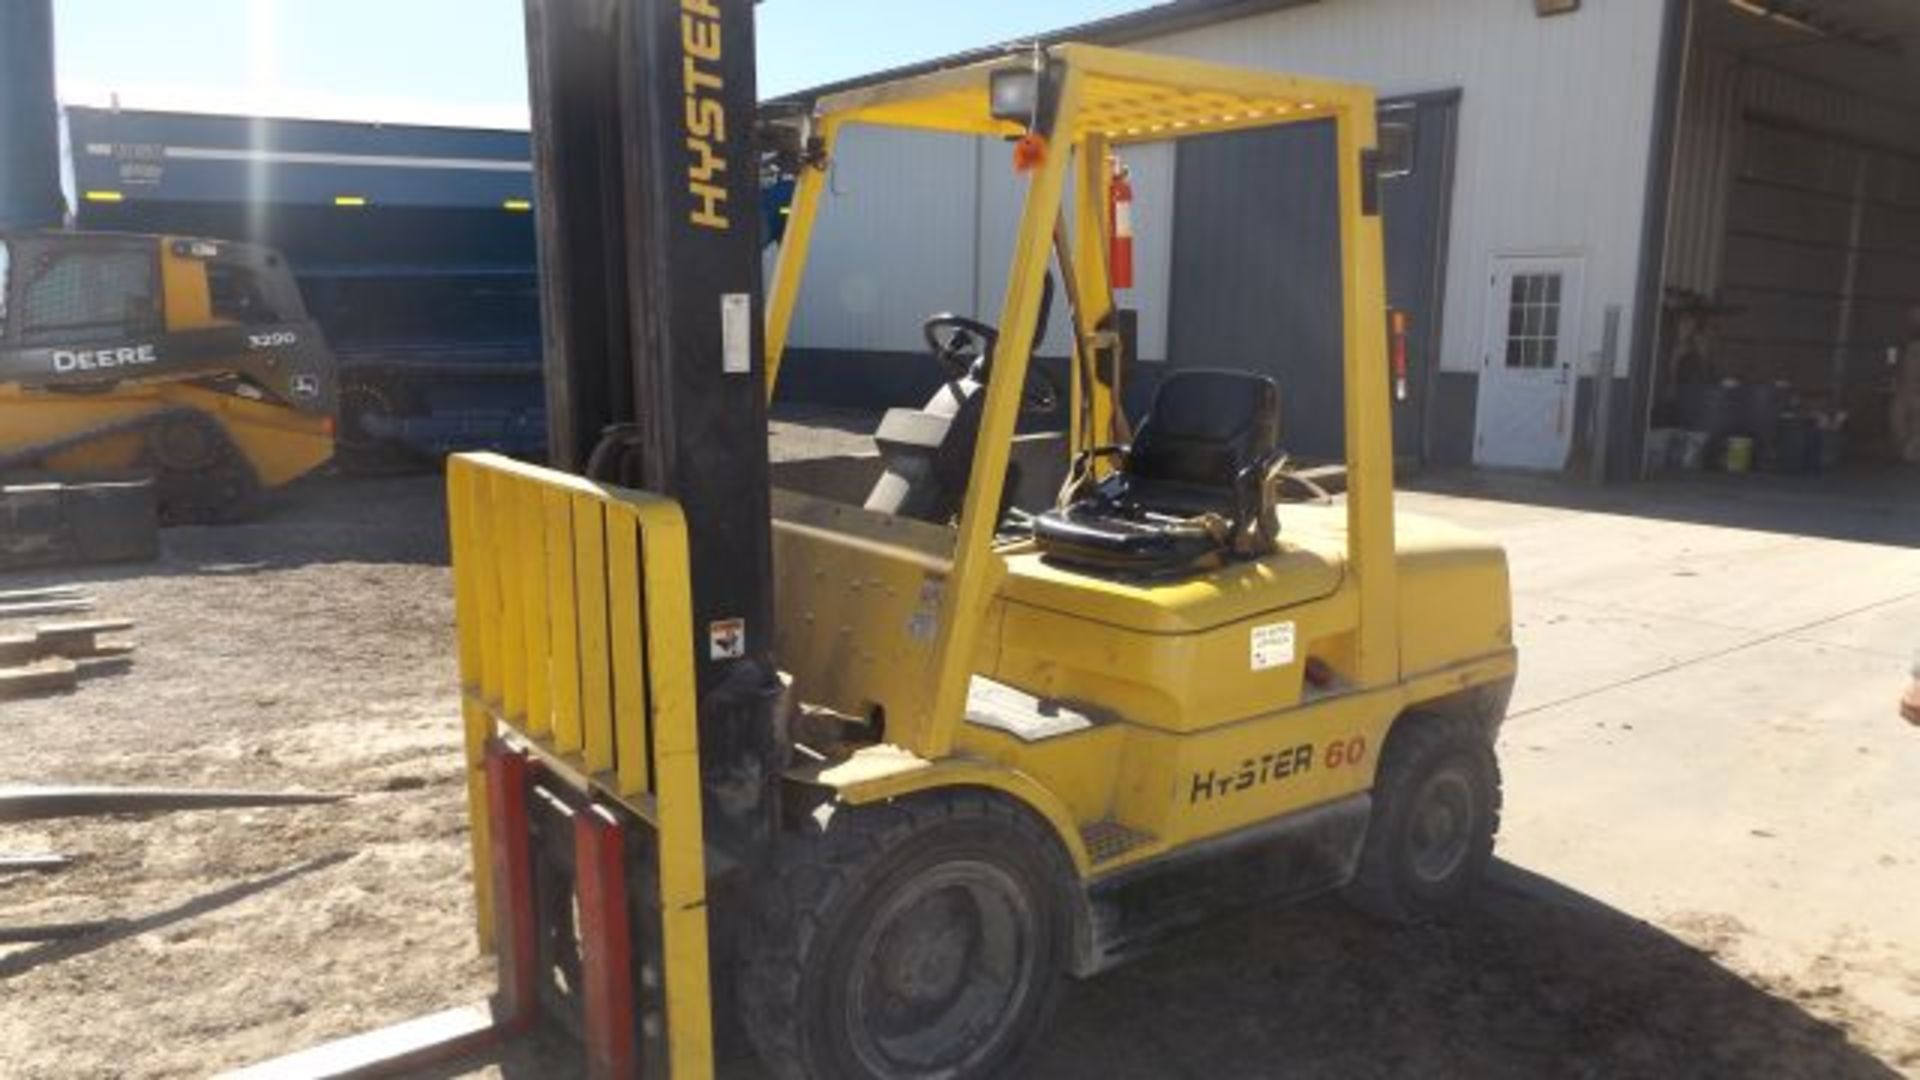 Hyster 60 Fork Lift 1029 hrs, Gas, 3 Stage Low-Profile Mast, 48" Forks, 6000# Capacity